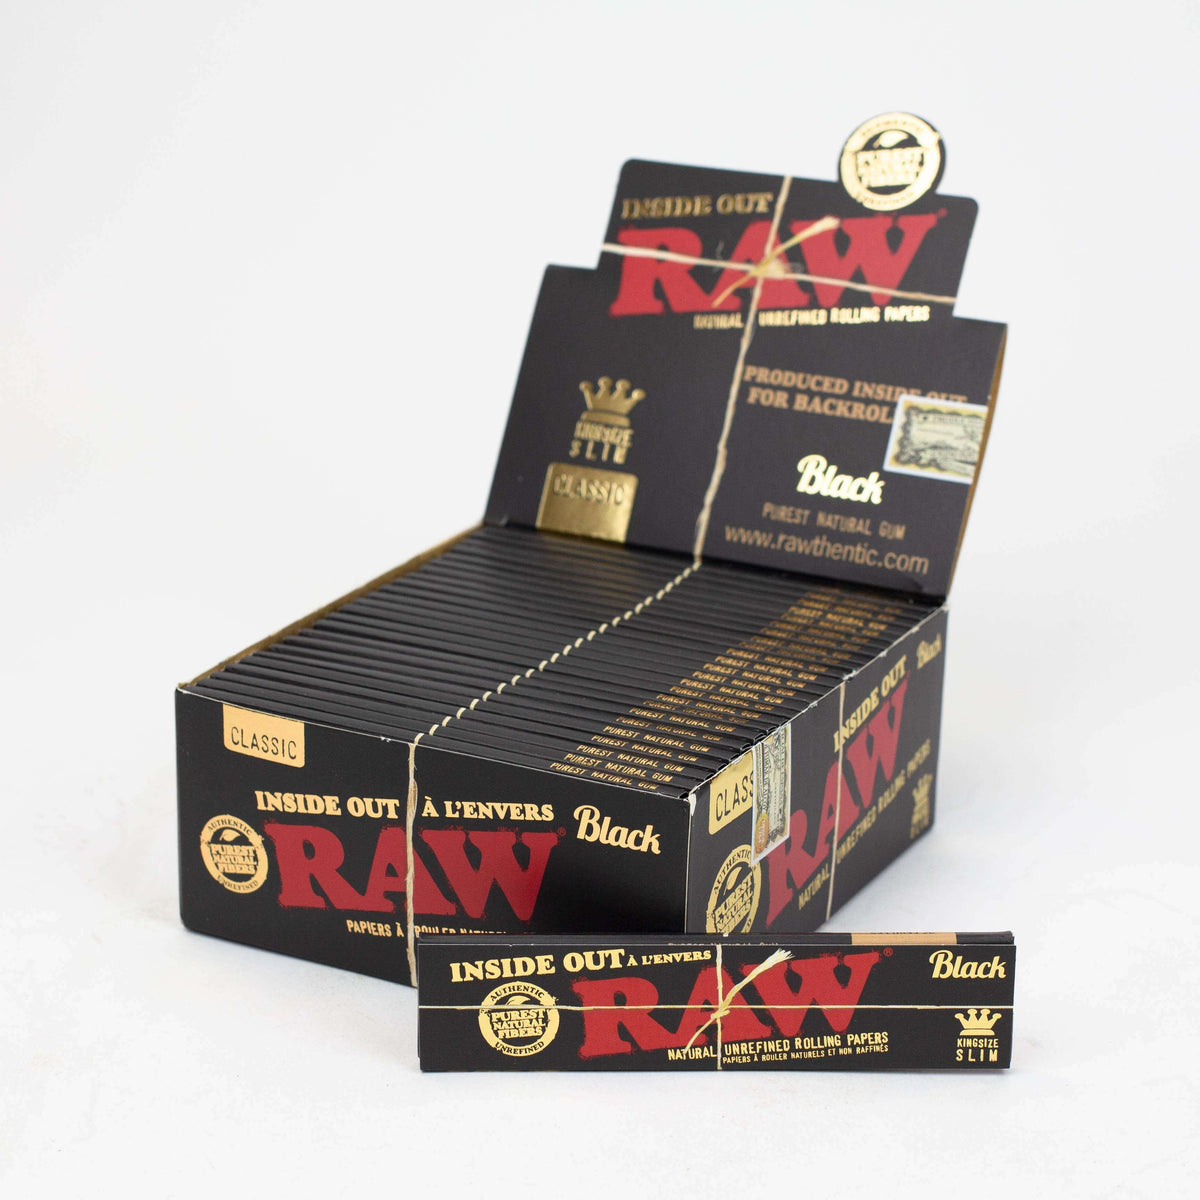 RAW Black Inside Out King Slim Rolling Papers (Full Box)